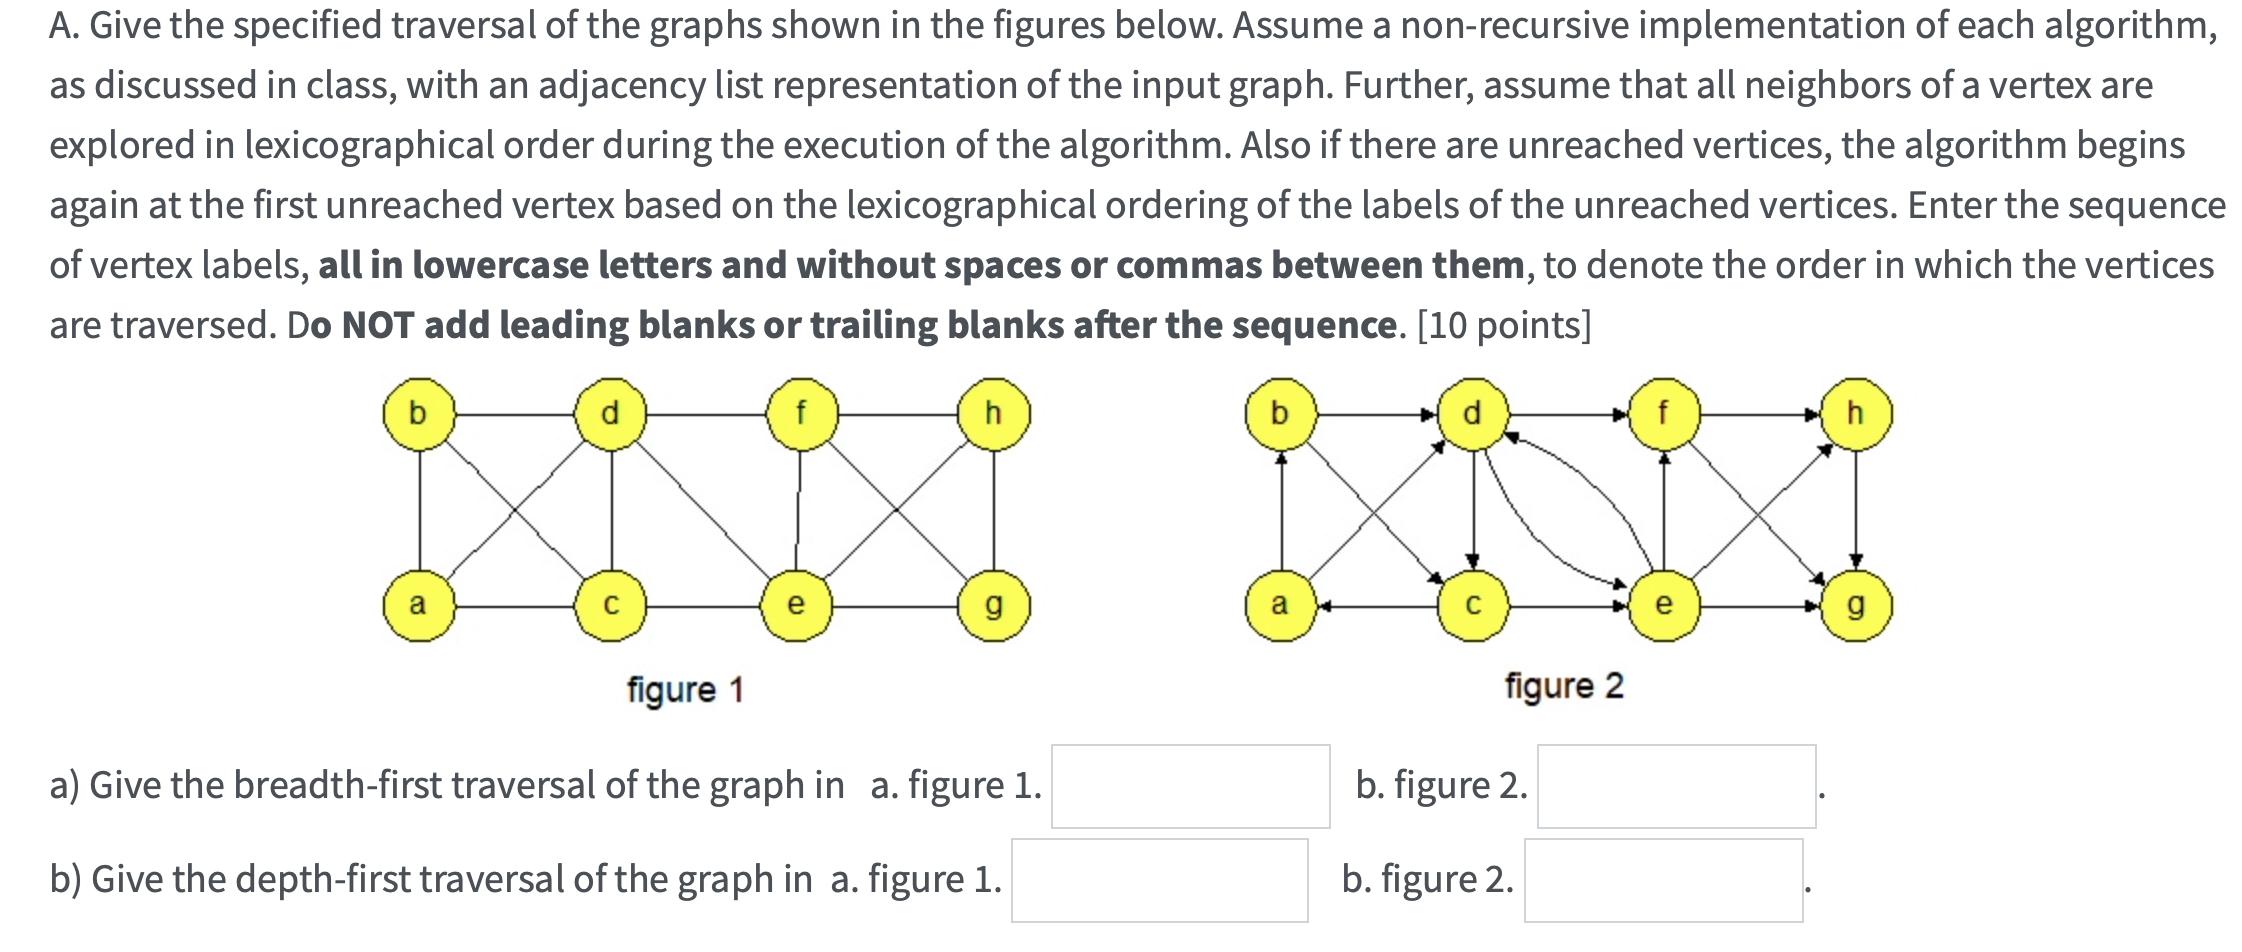 A. Give the specified traversal of the graphs shown in the figures below. Assume a non-recursive